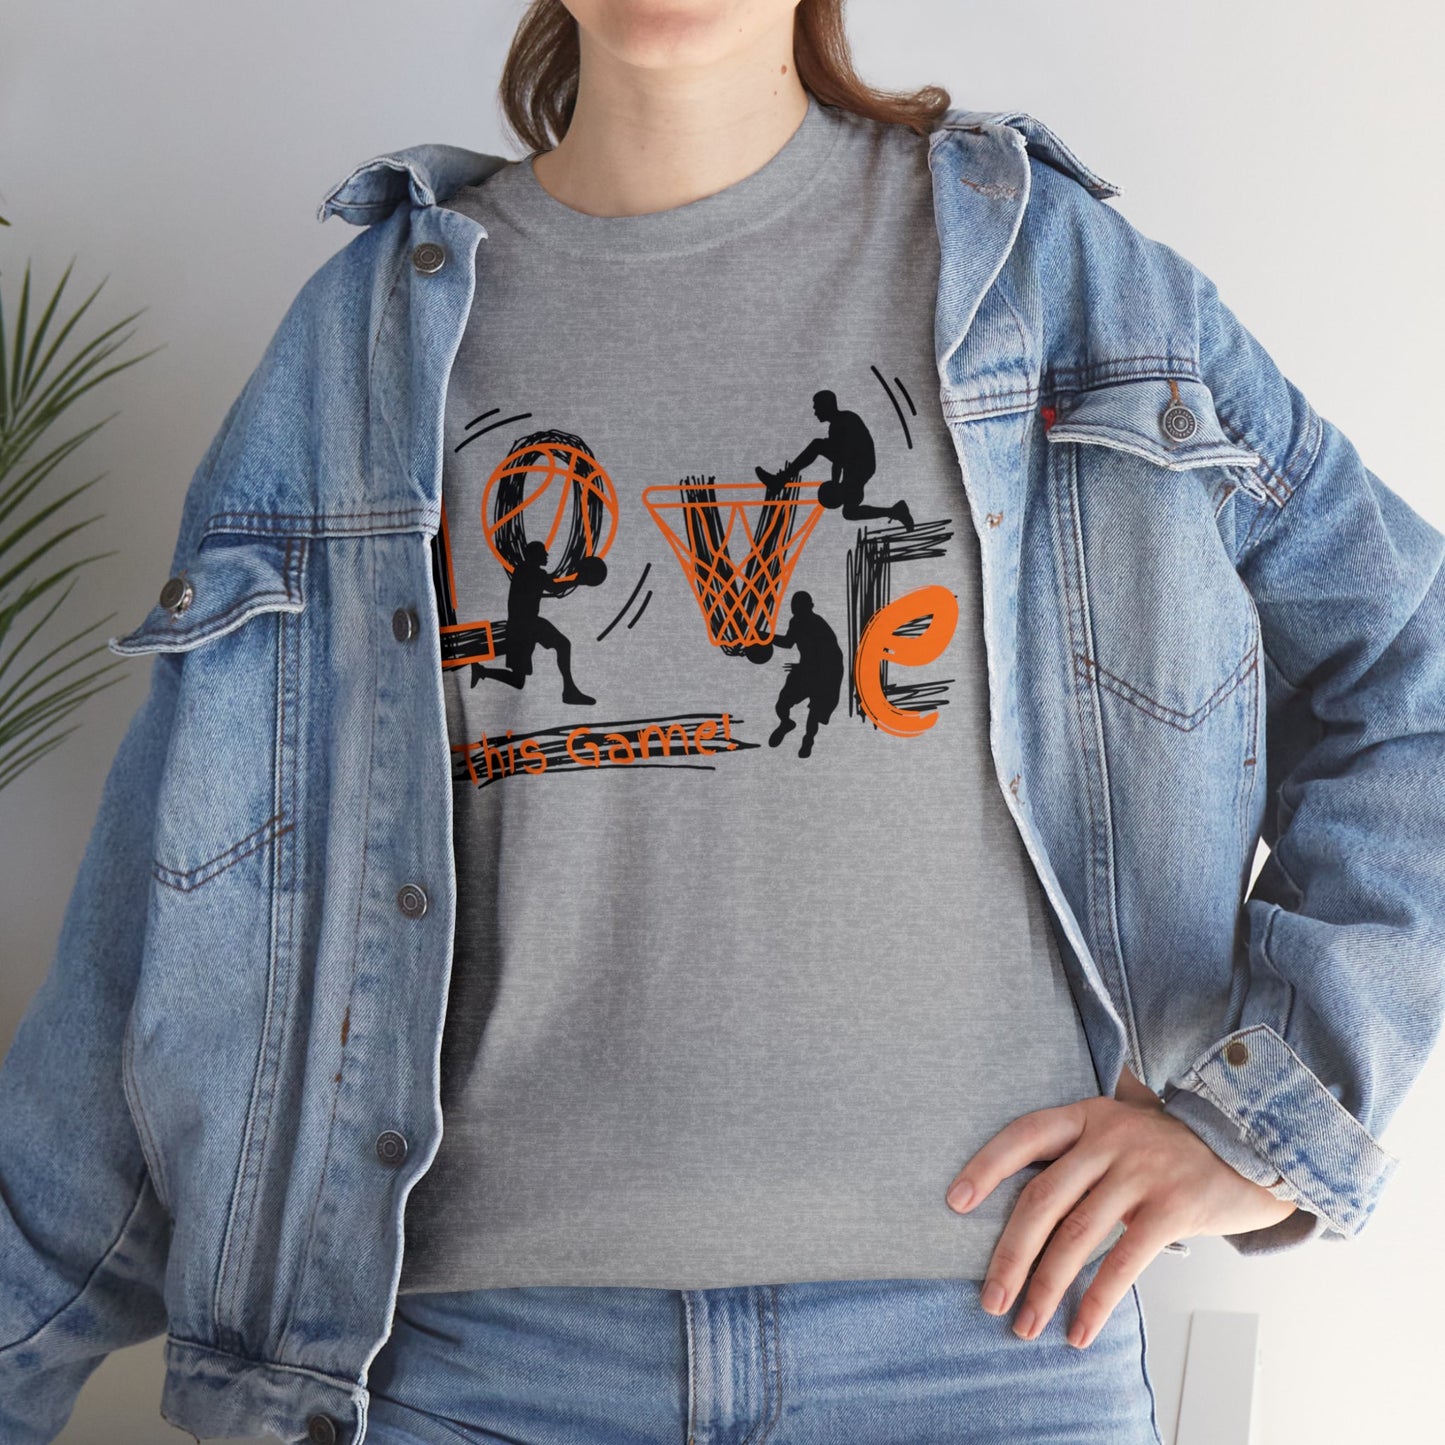 Love This Game Basketball Unisex Heavy Cotton Tee